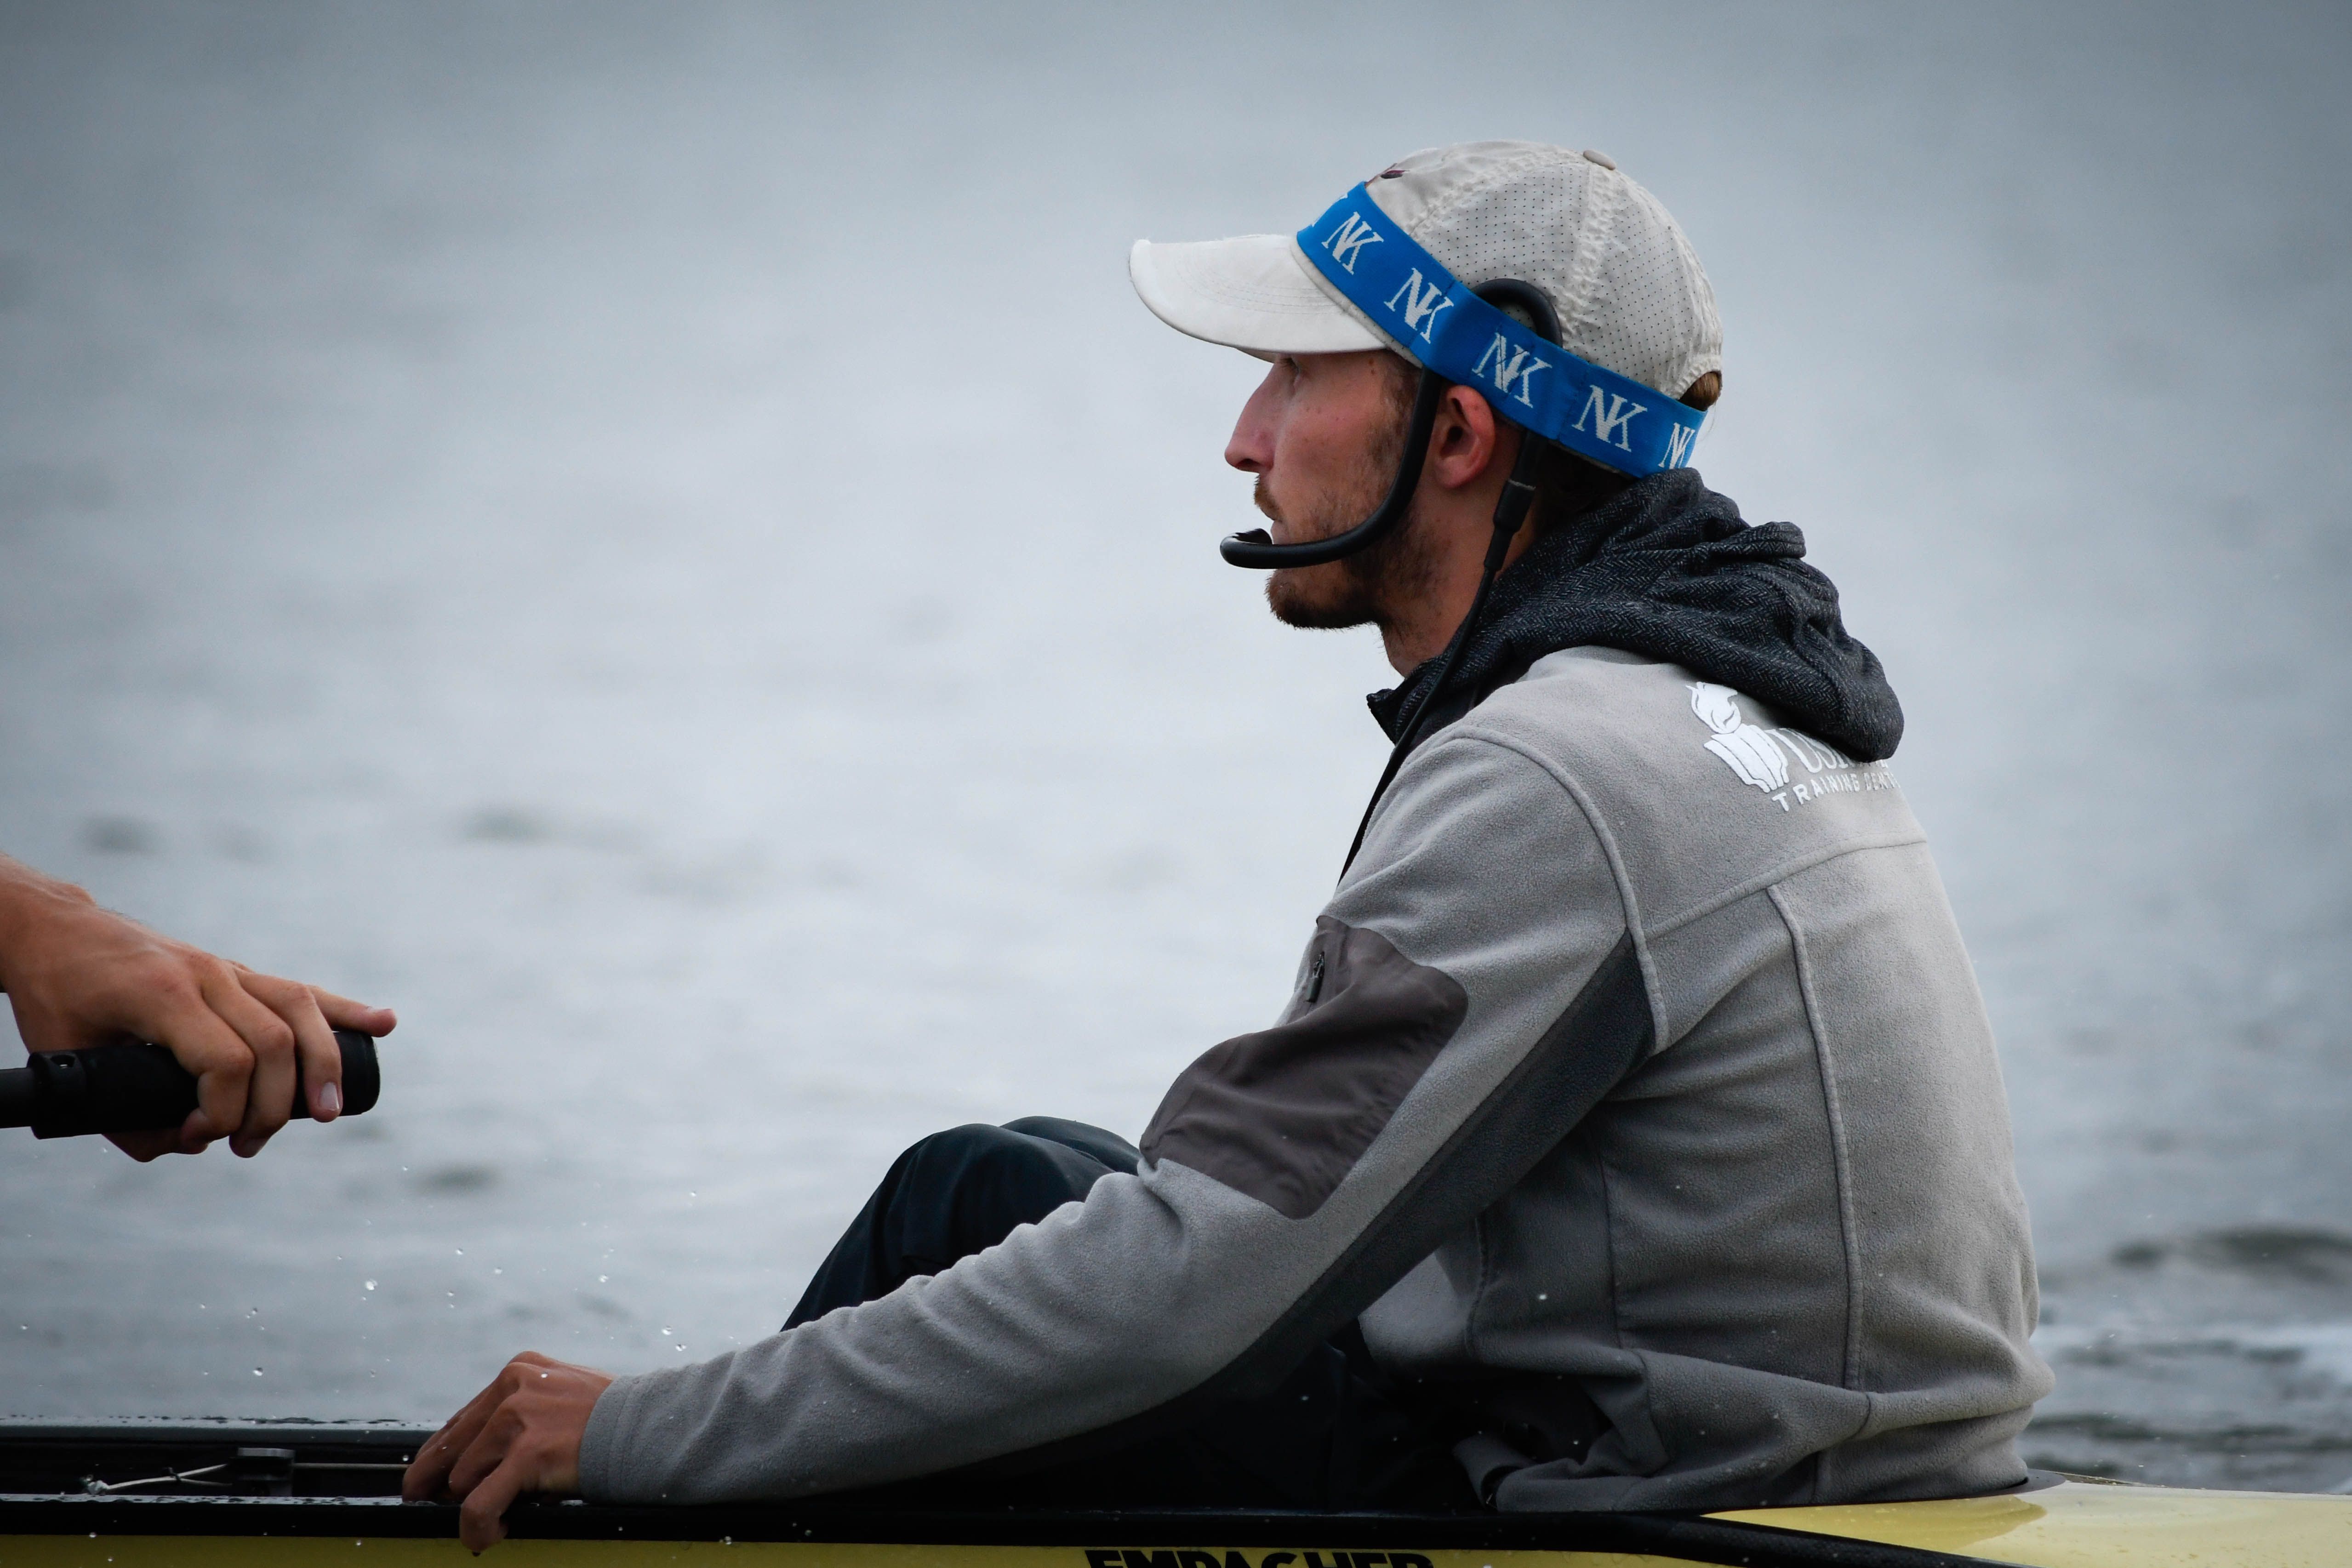 USRowing partners with Oakley - USRowing